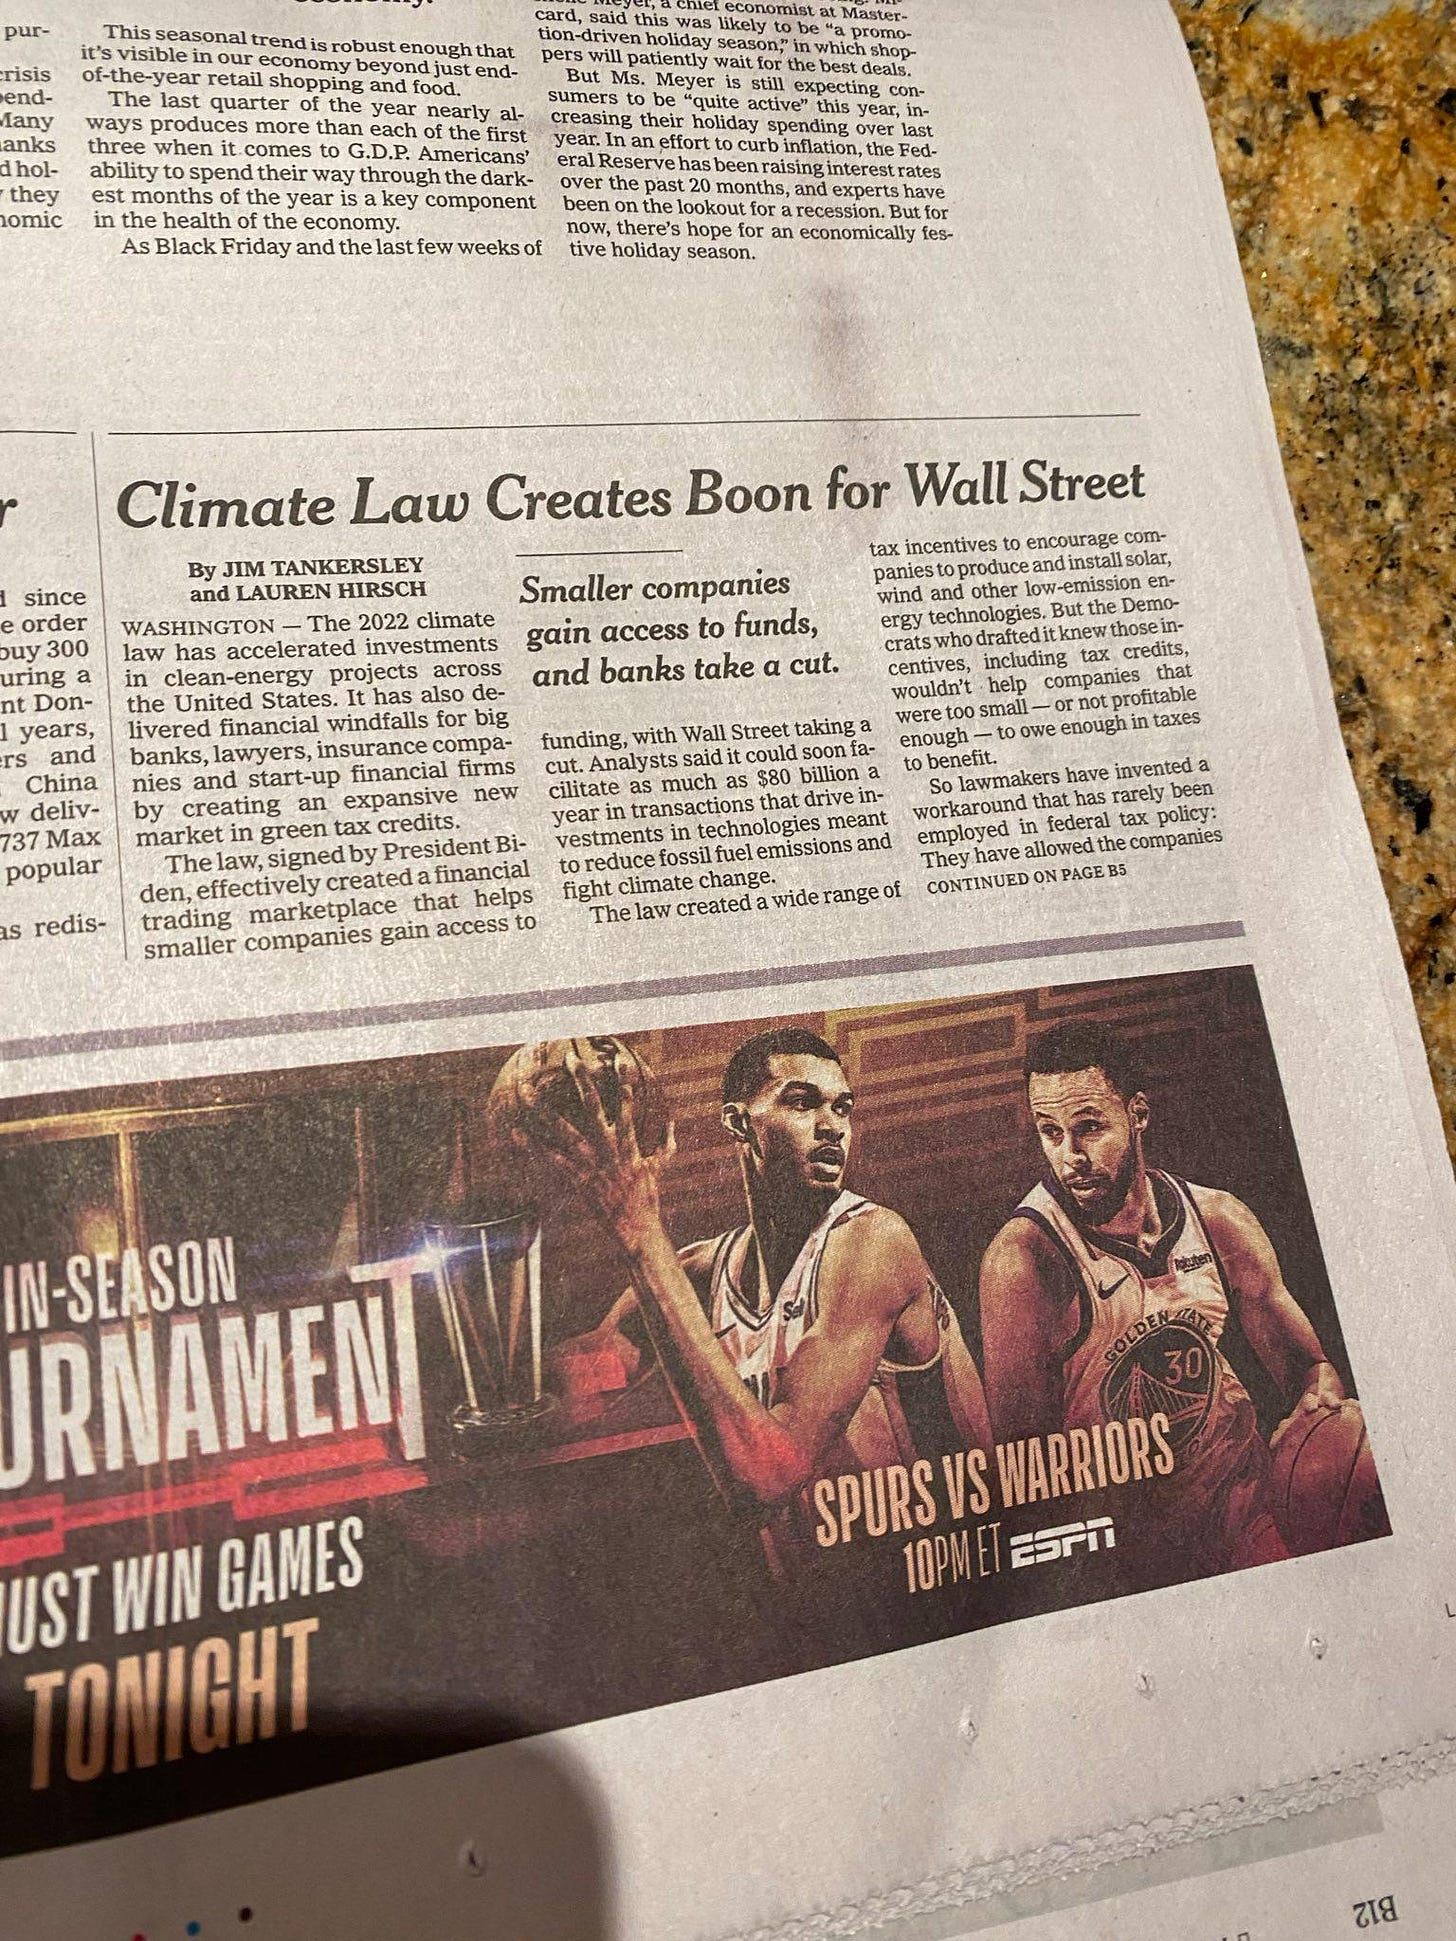 NYT article "Climate Law Creates Boon for Wall Street"